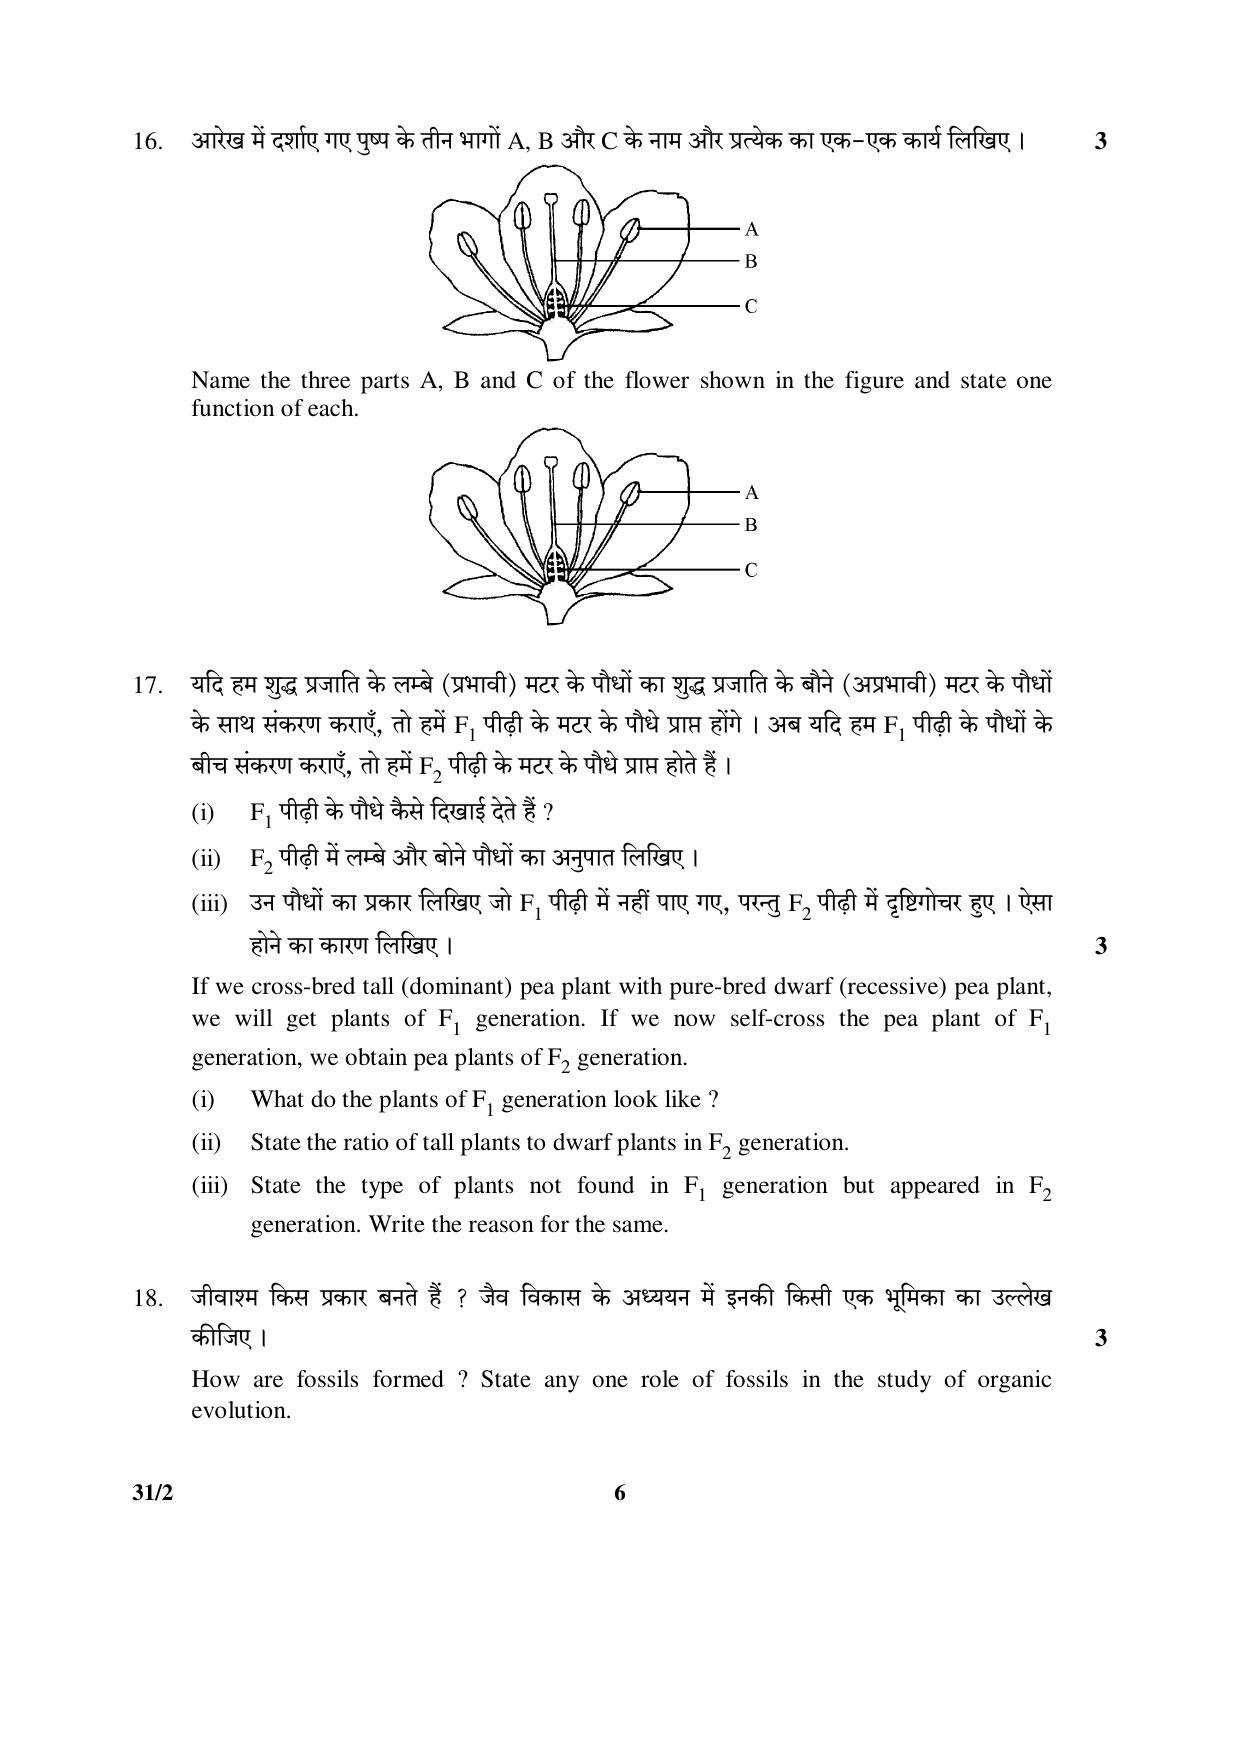 CBSE Class 10 31-2 (Science) 2017-comptt Question Paper - Page 6